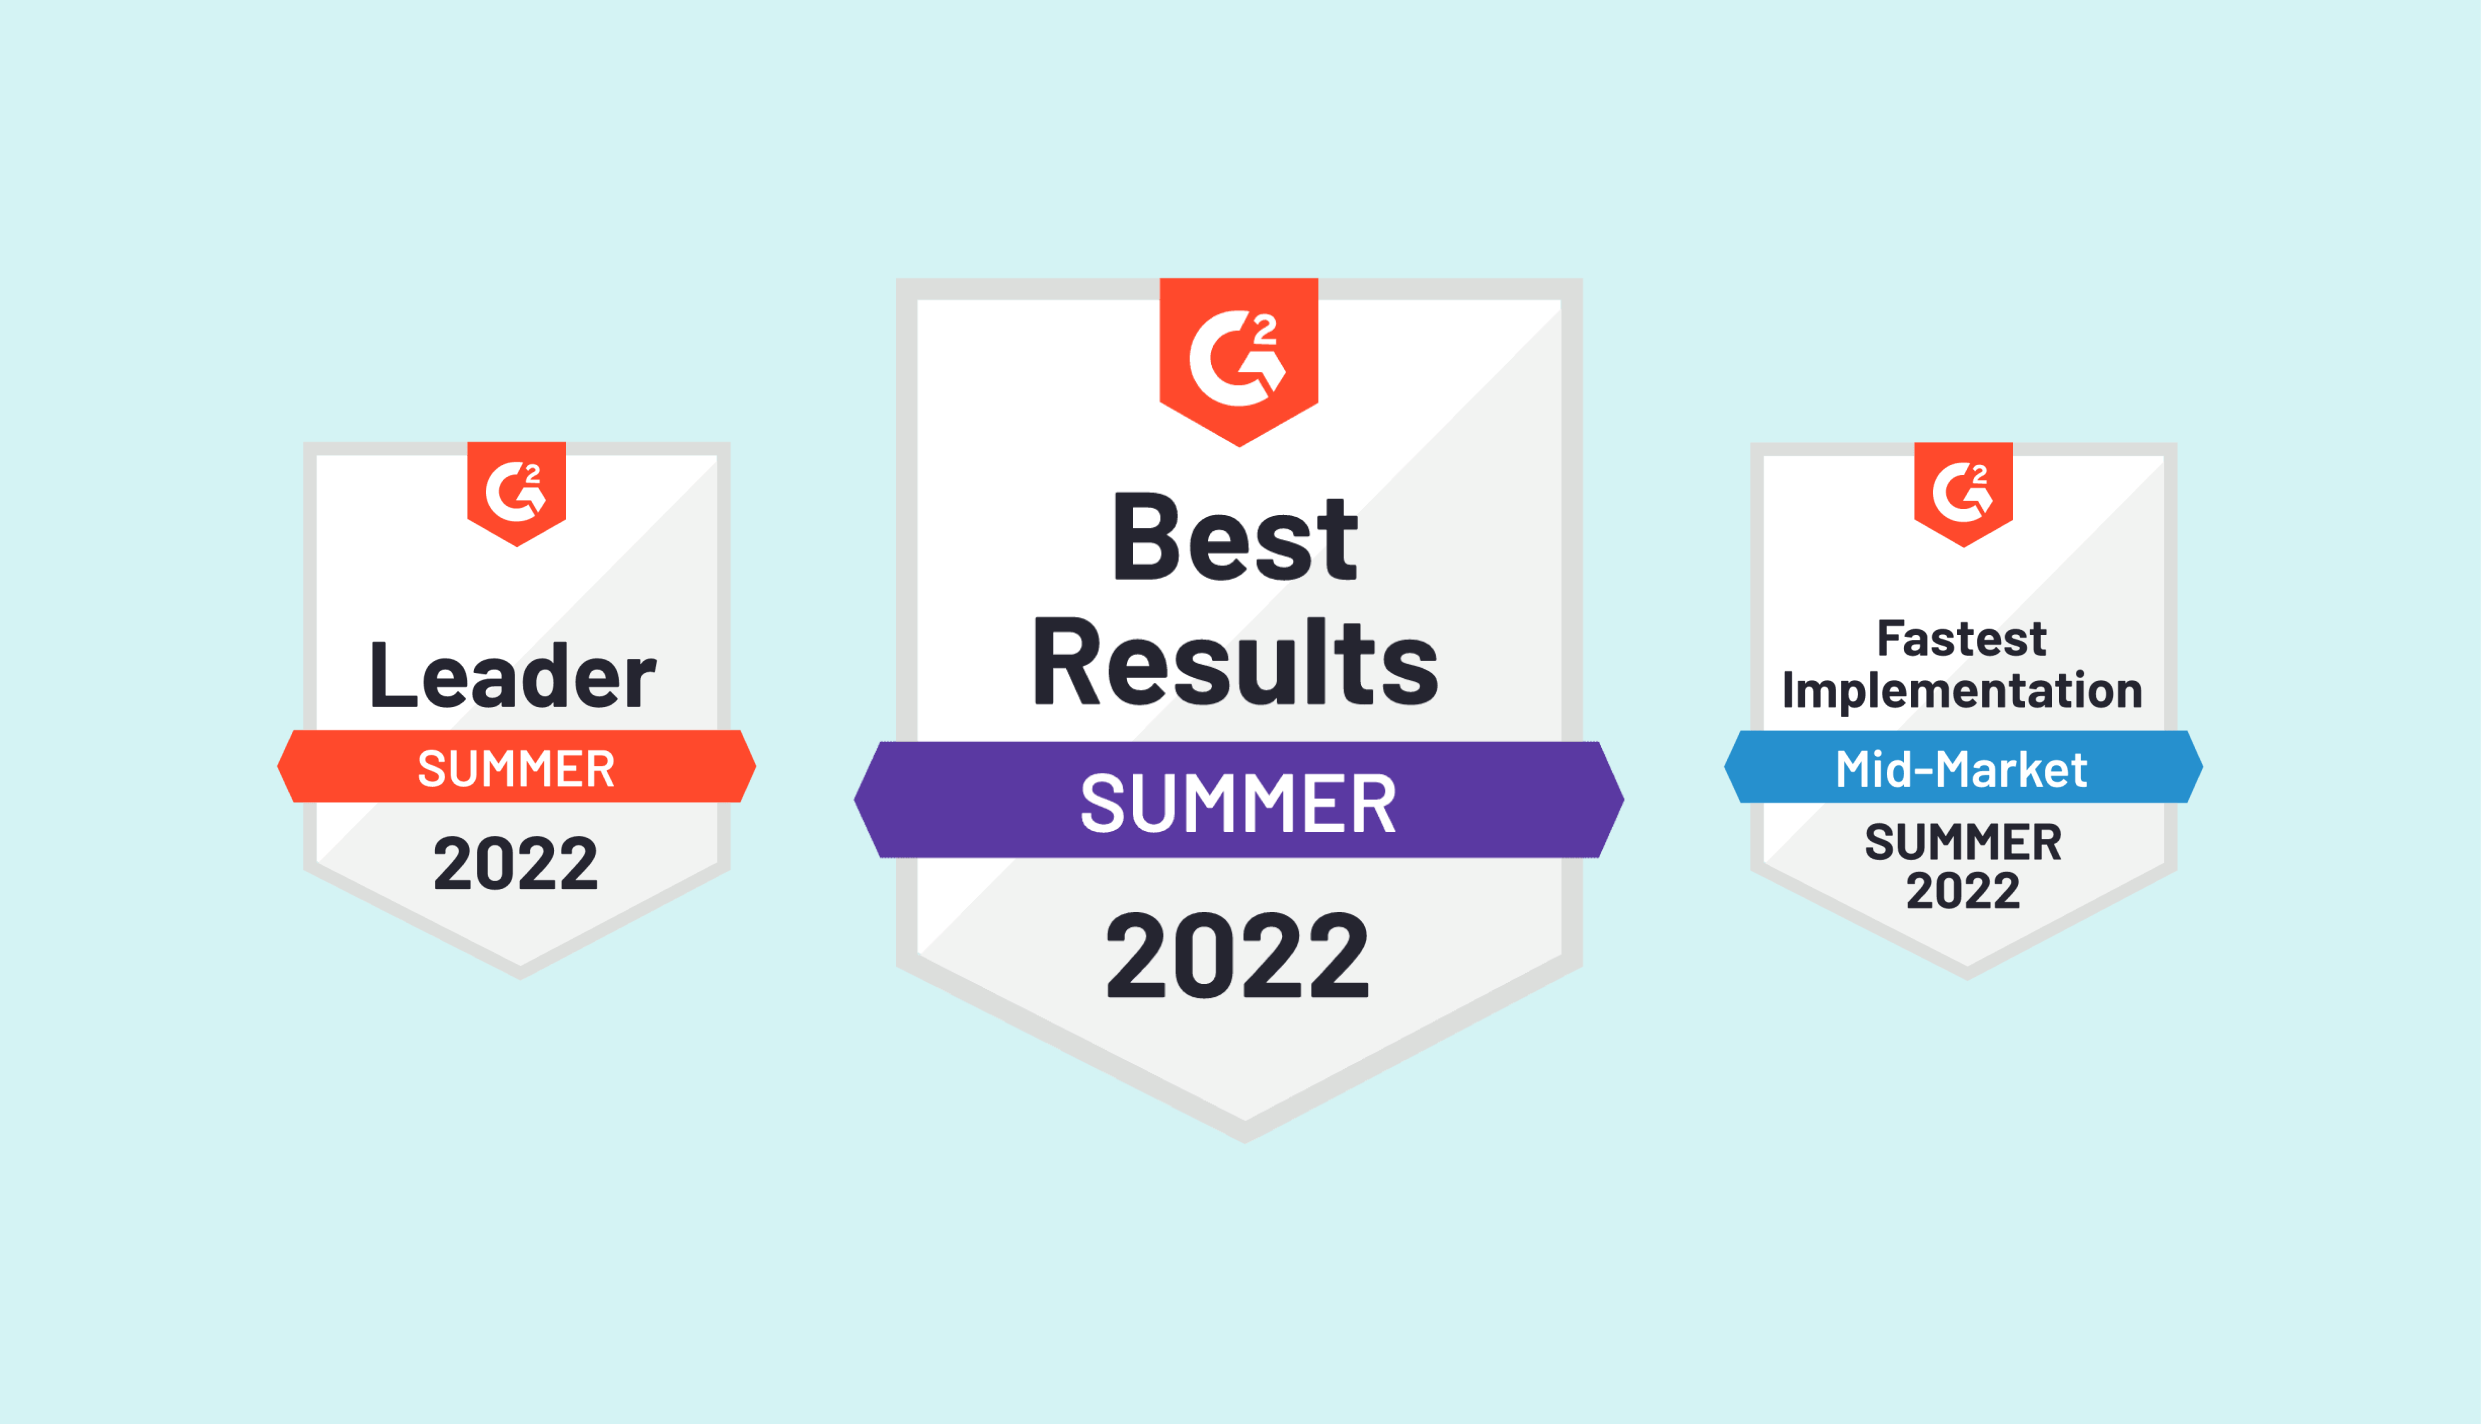 BigTime is the Highest Rated, Easiest to Use, and Leader in Customer Satisfaction in G2 PSA Software Category